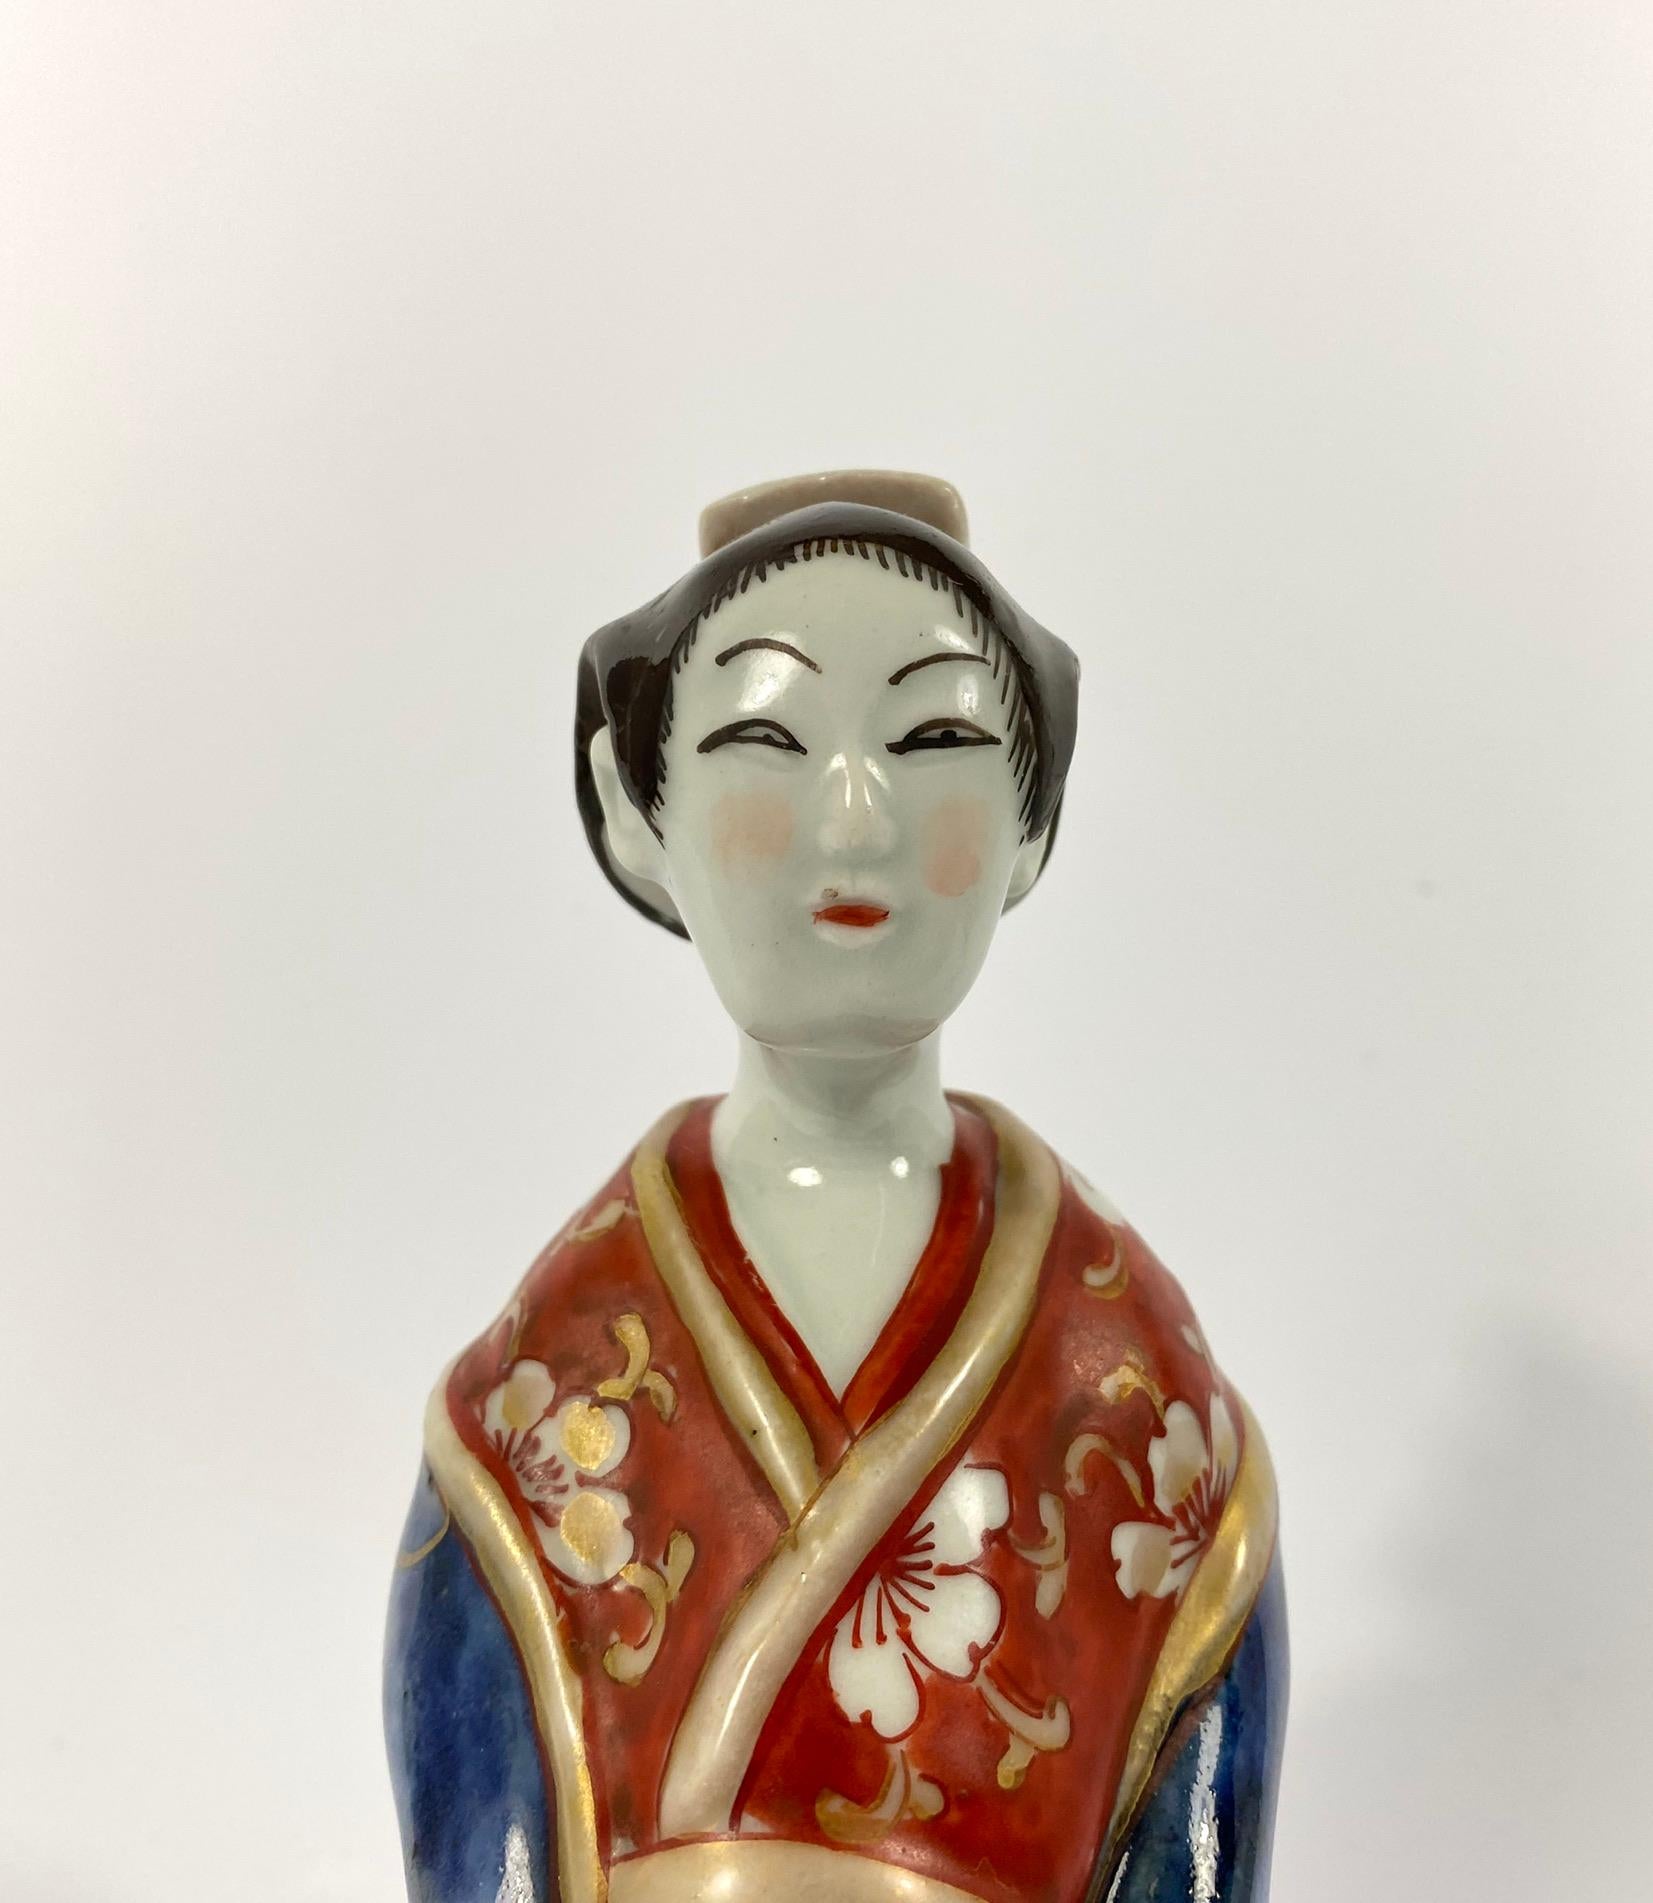 A Japanese Imari porcelain figure, circa 1700, Genroku Period. Finely modelled as a Bijin, wearing an elaborate underglaze blue kimono, painted with large flowerheads, on an iron red ground, and heightened with gilt flowering plants.
Having an